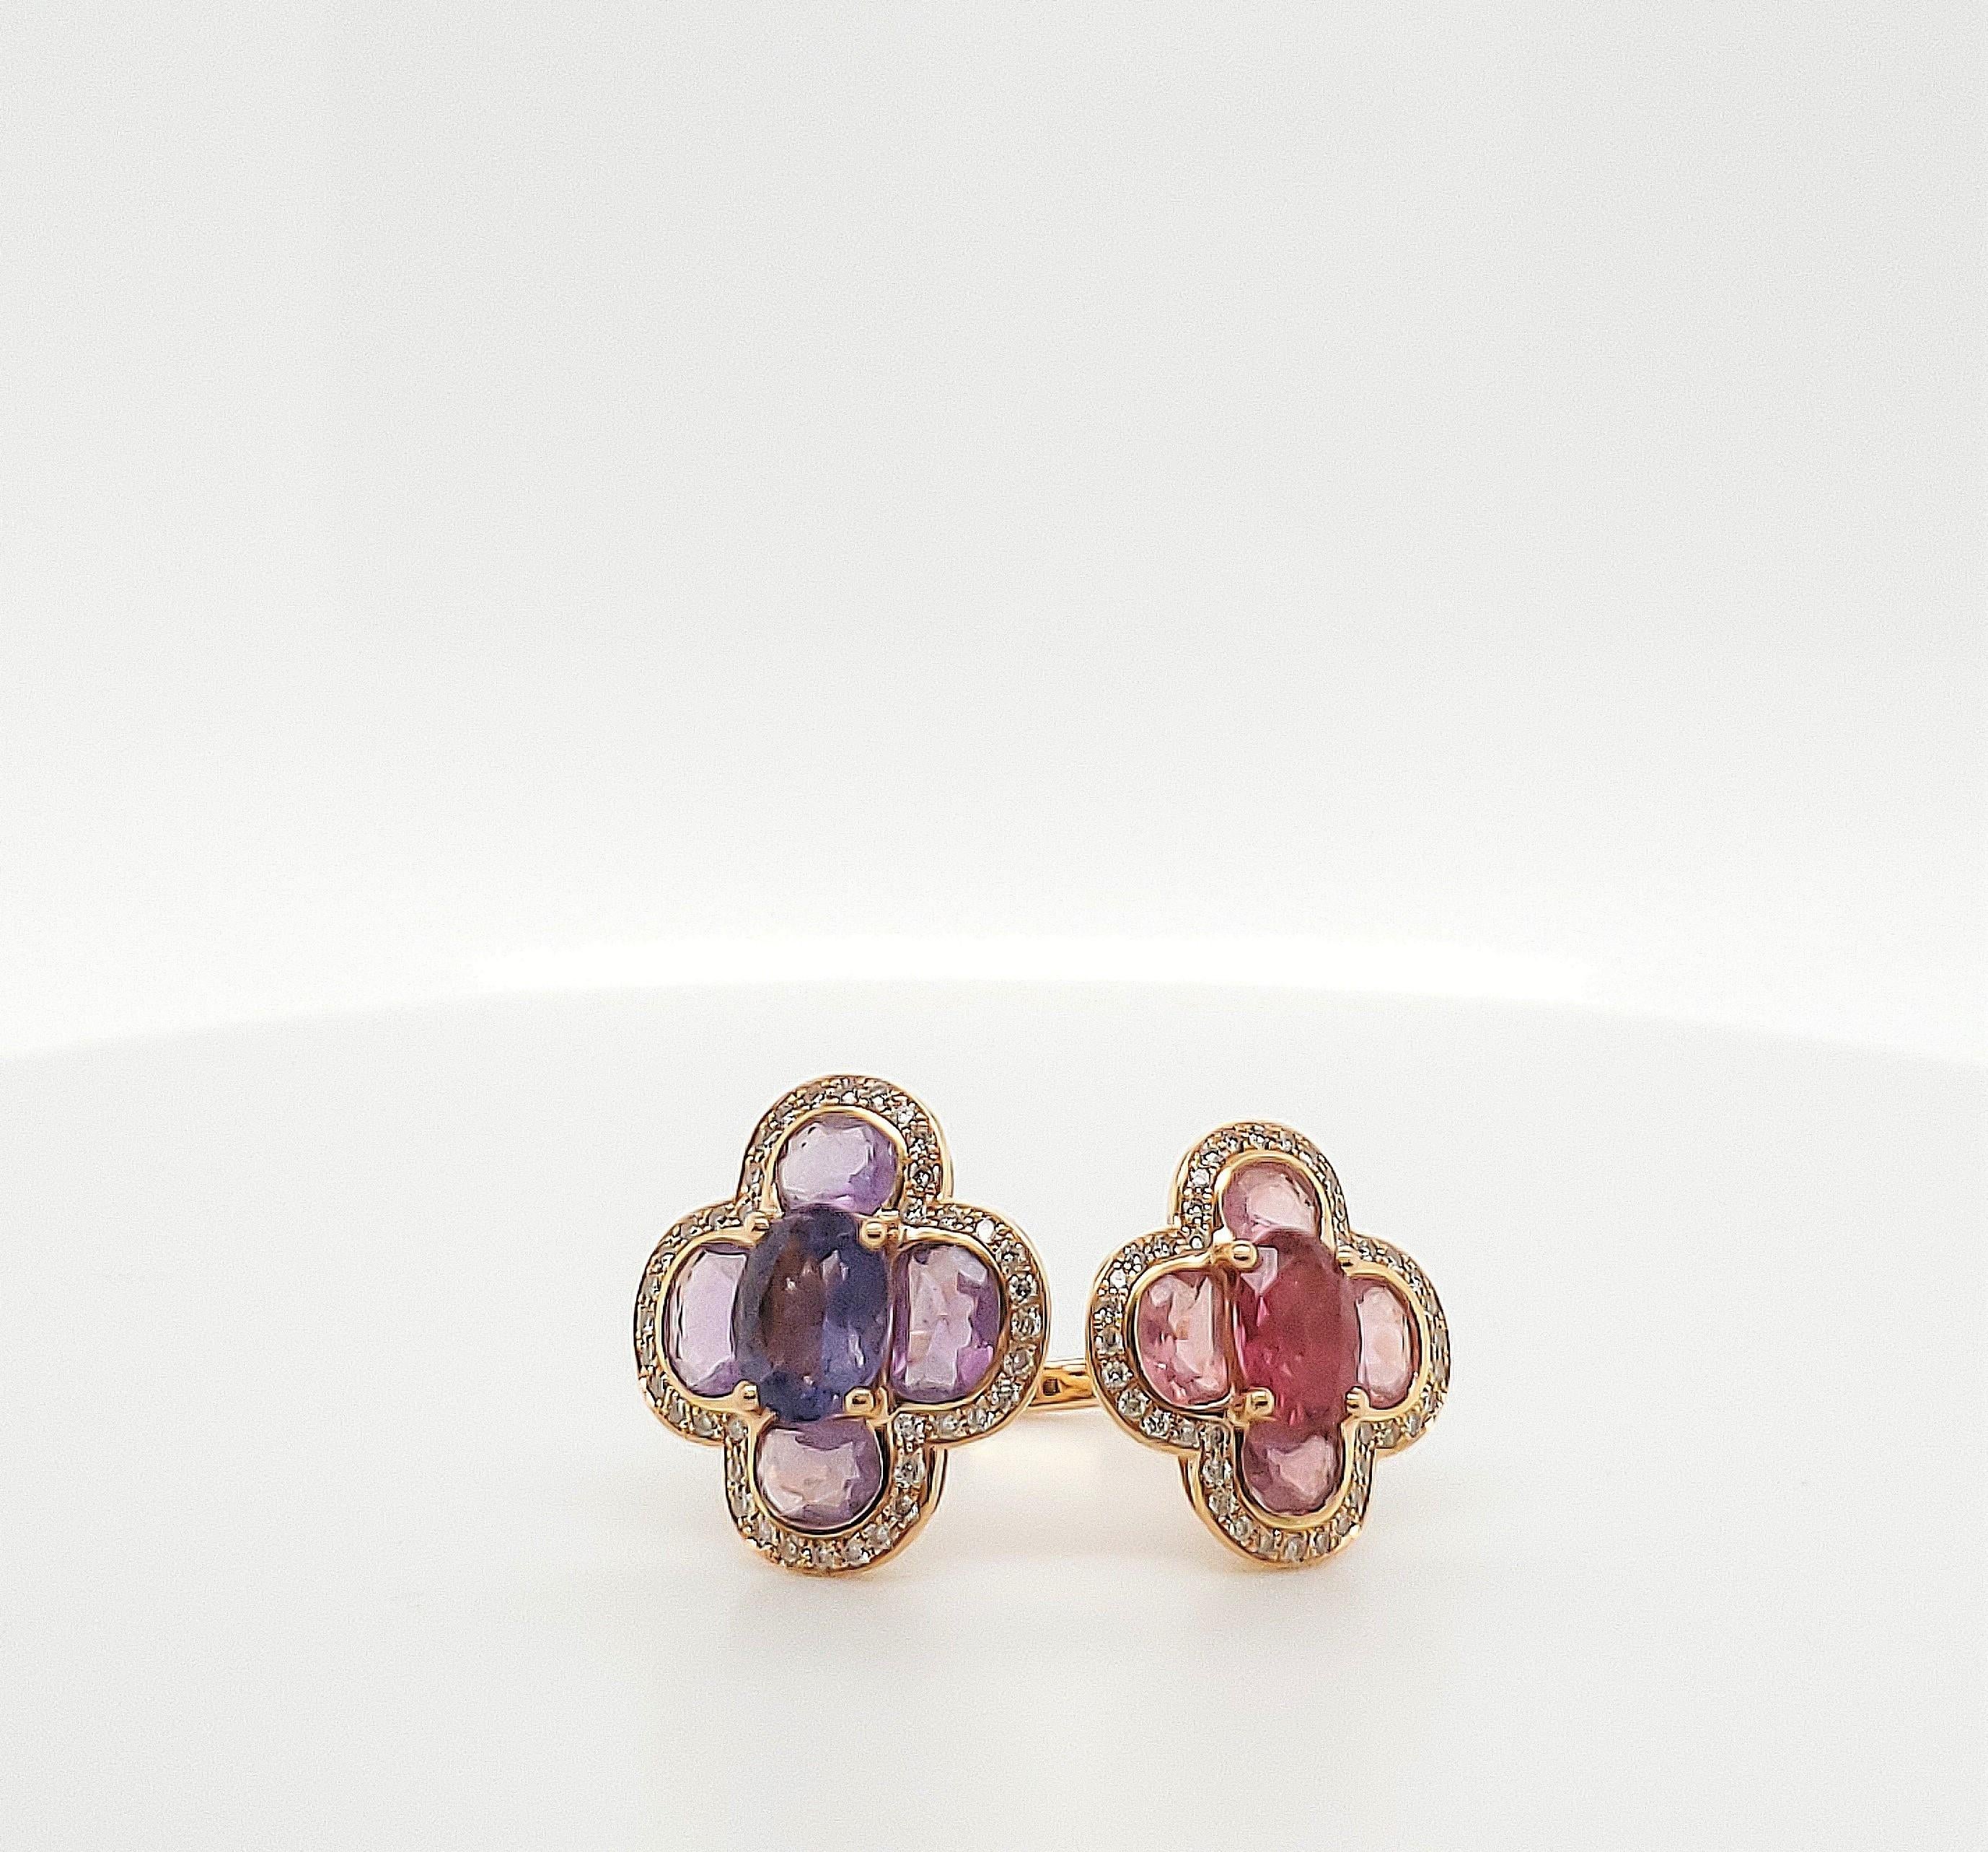 Isabelle Langlois amethyst and pink tourmaline stone floral bypass ring crafted in 18 karat rose gold. An estimated 0.30 carats of round brilliant cut diamonds accent the gemstones. Signed Isabelle Langlois, 750. Ring size 6. Does not come with